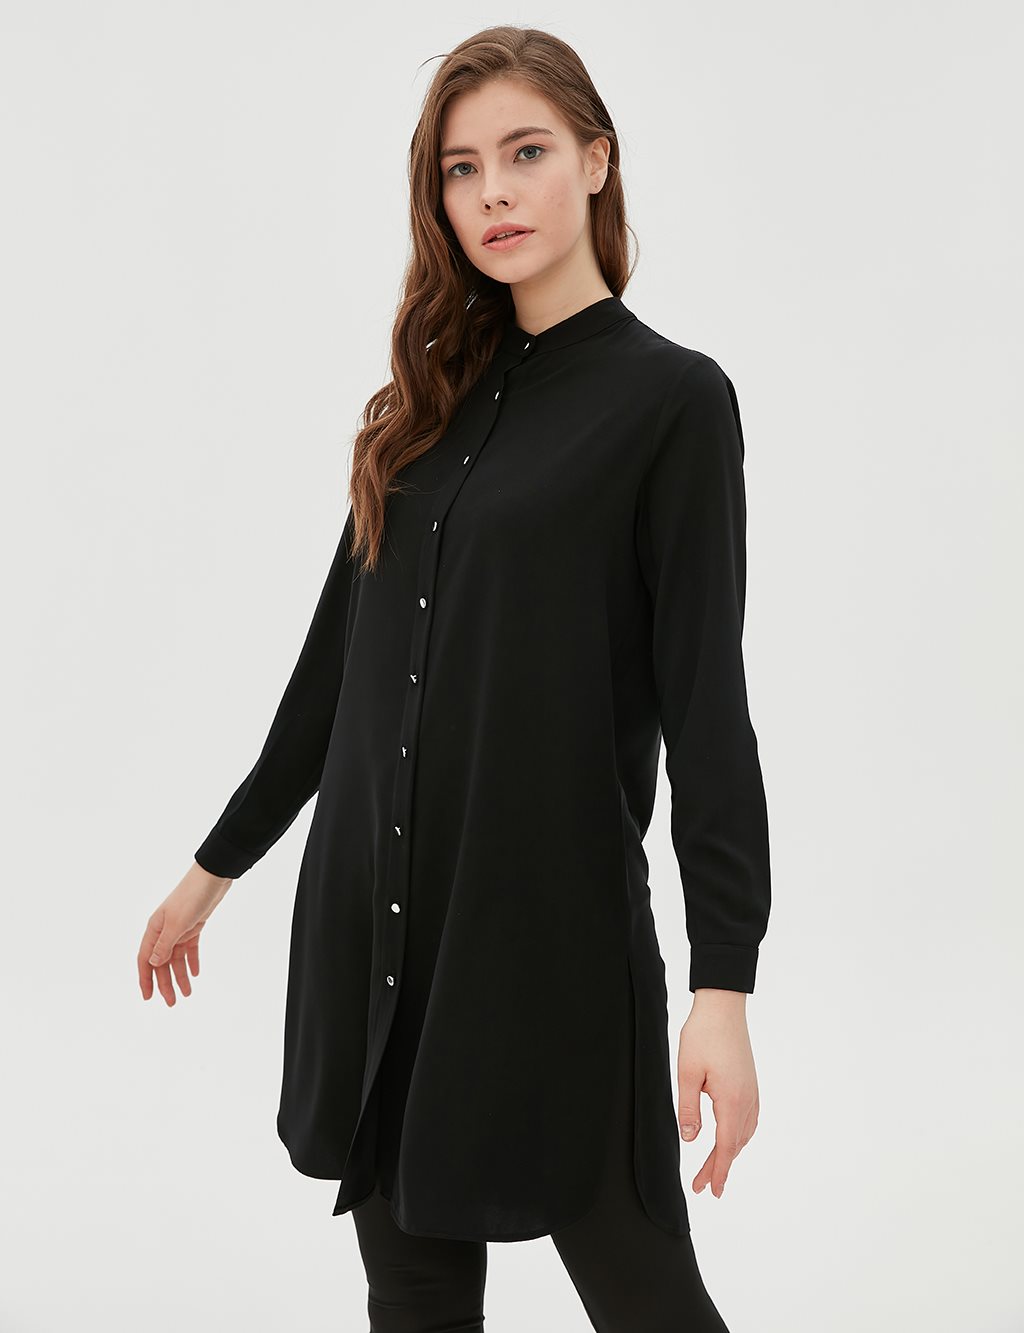 Tunic With Button SZ 21505 Black